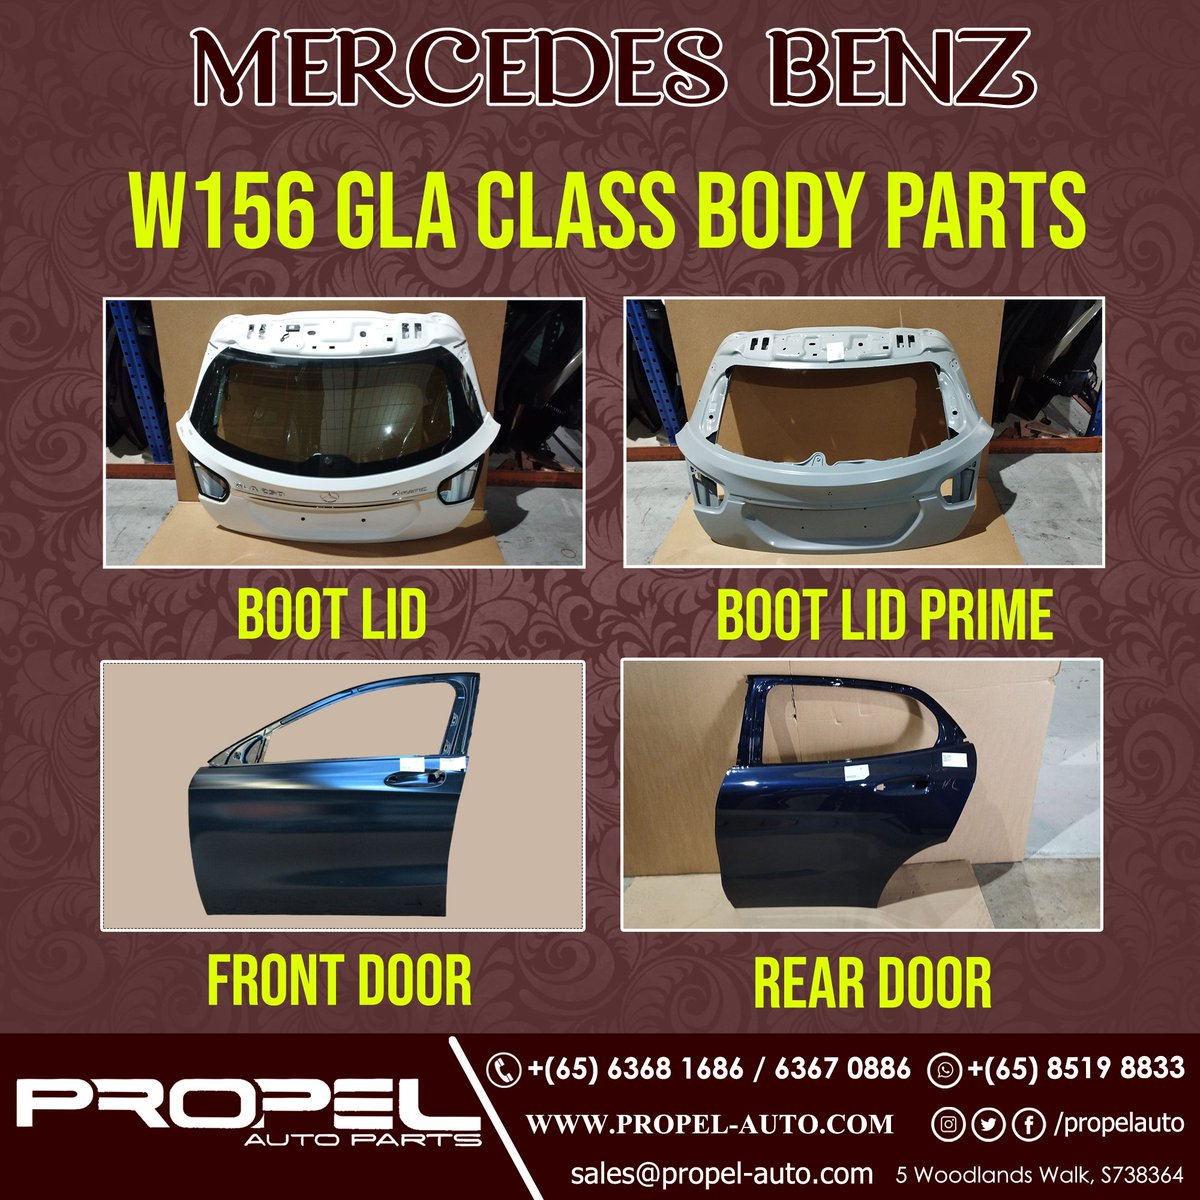 Mercedes W156 GLA Door Shell & Boot Lids available in #ReadyStock Come & Grab at #5WoodlandsWalk #SG #GenuineBodyParts #SGcars #ImportedGoods #GLA #W156 #GLA180 #GLA200 #GLA220 #Bootlid #DoorShell #Emptydoors #PropelAutoParts #MercedesBenz #MercedesParts #Door #Buy #GrabFast